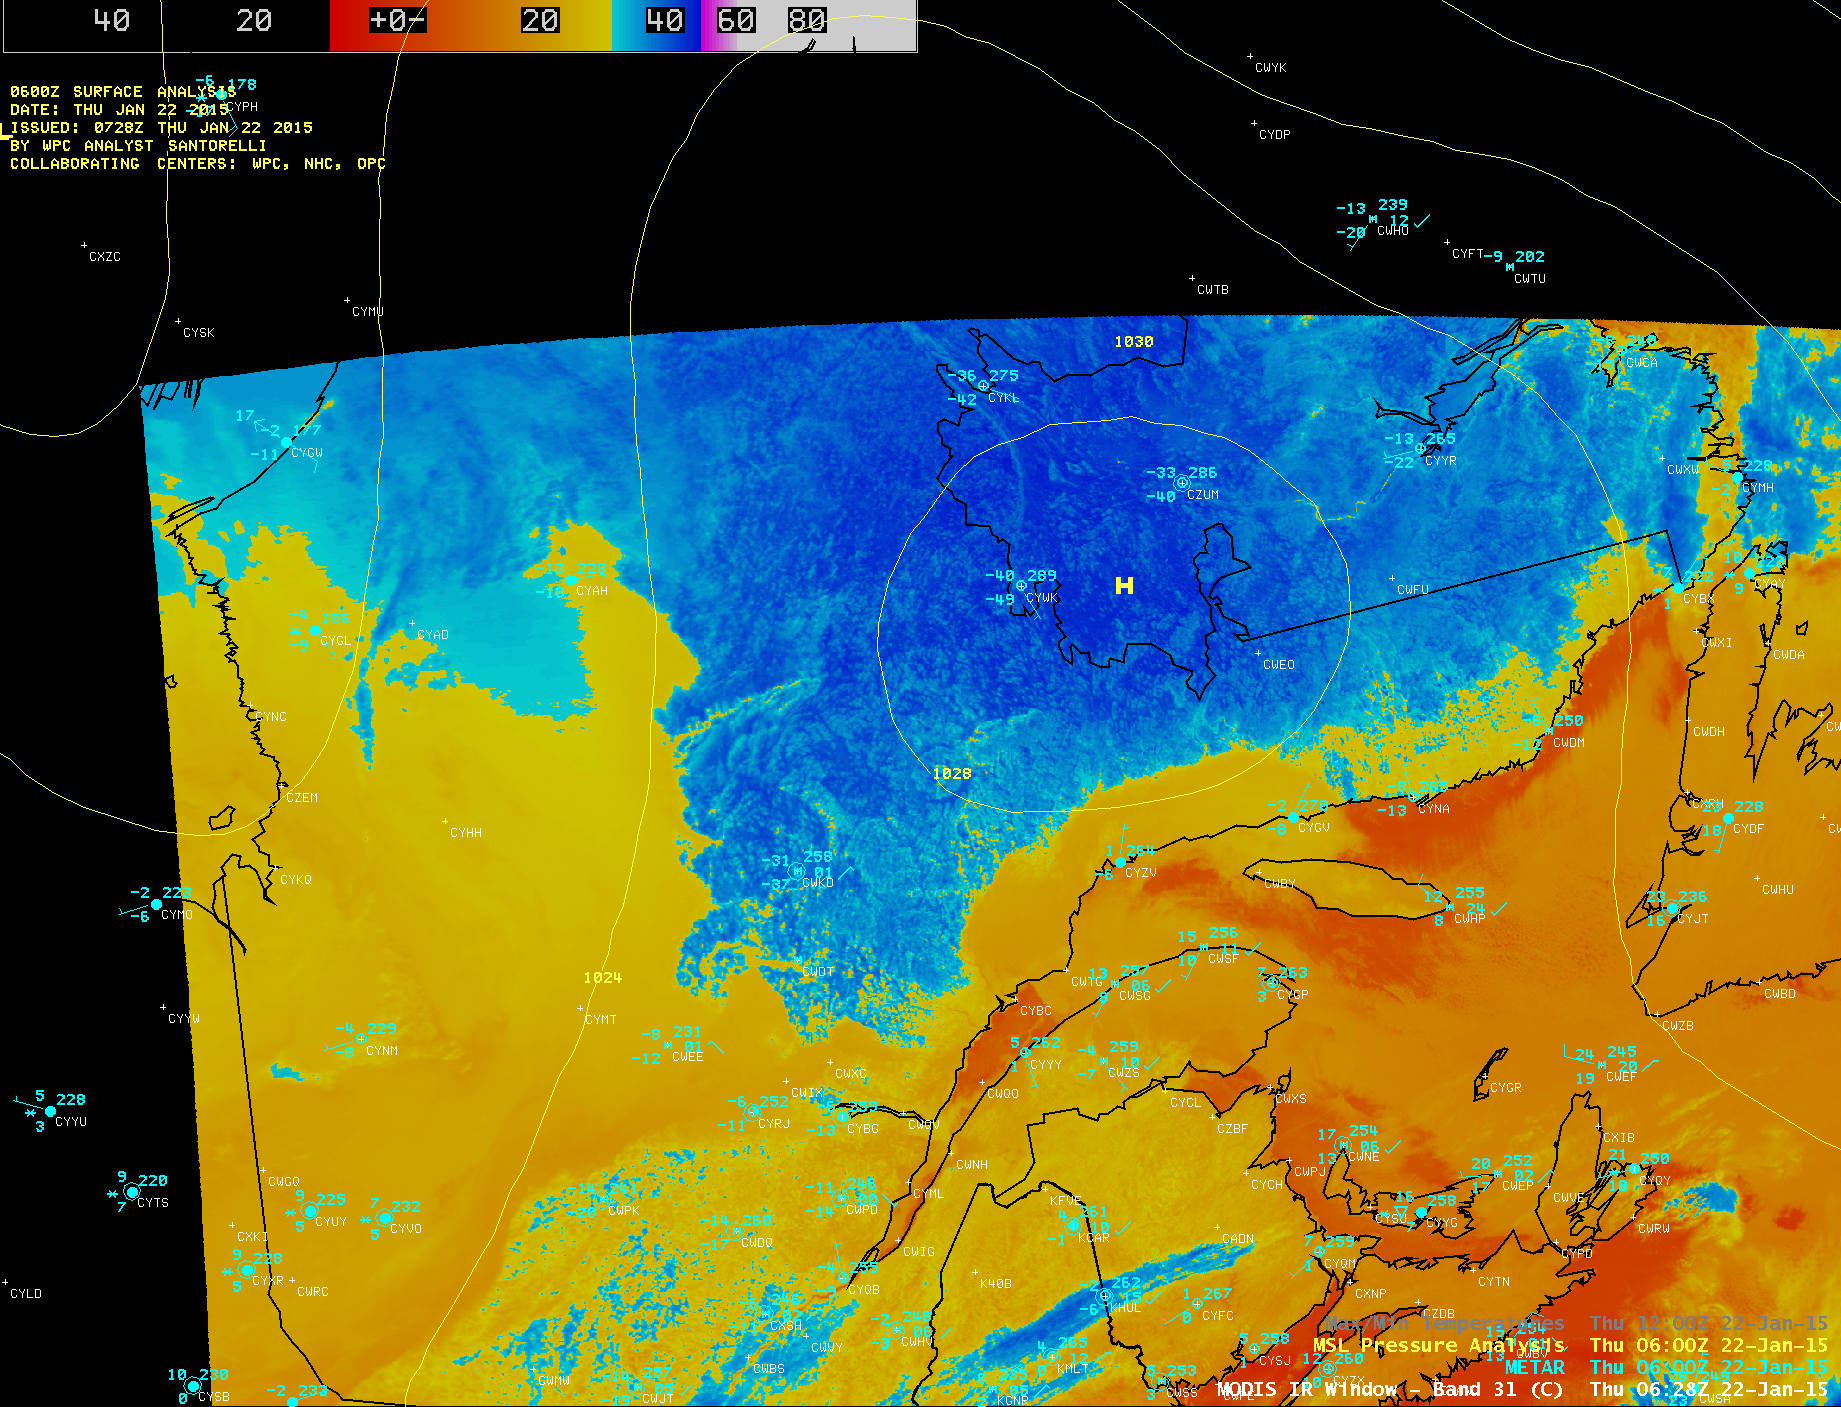 MODIS 11.0 um IR channel image, with METAR surface reports